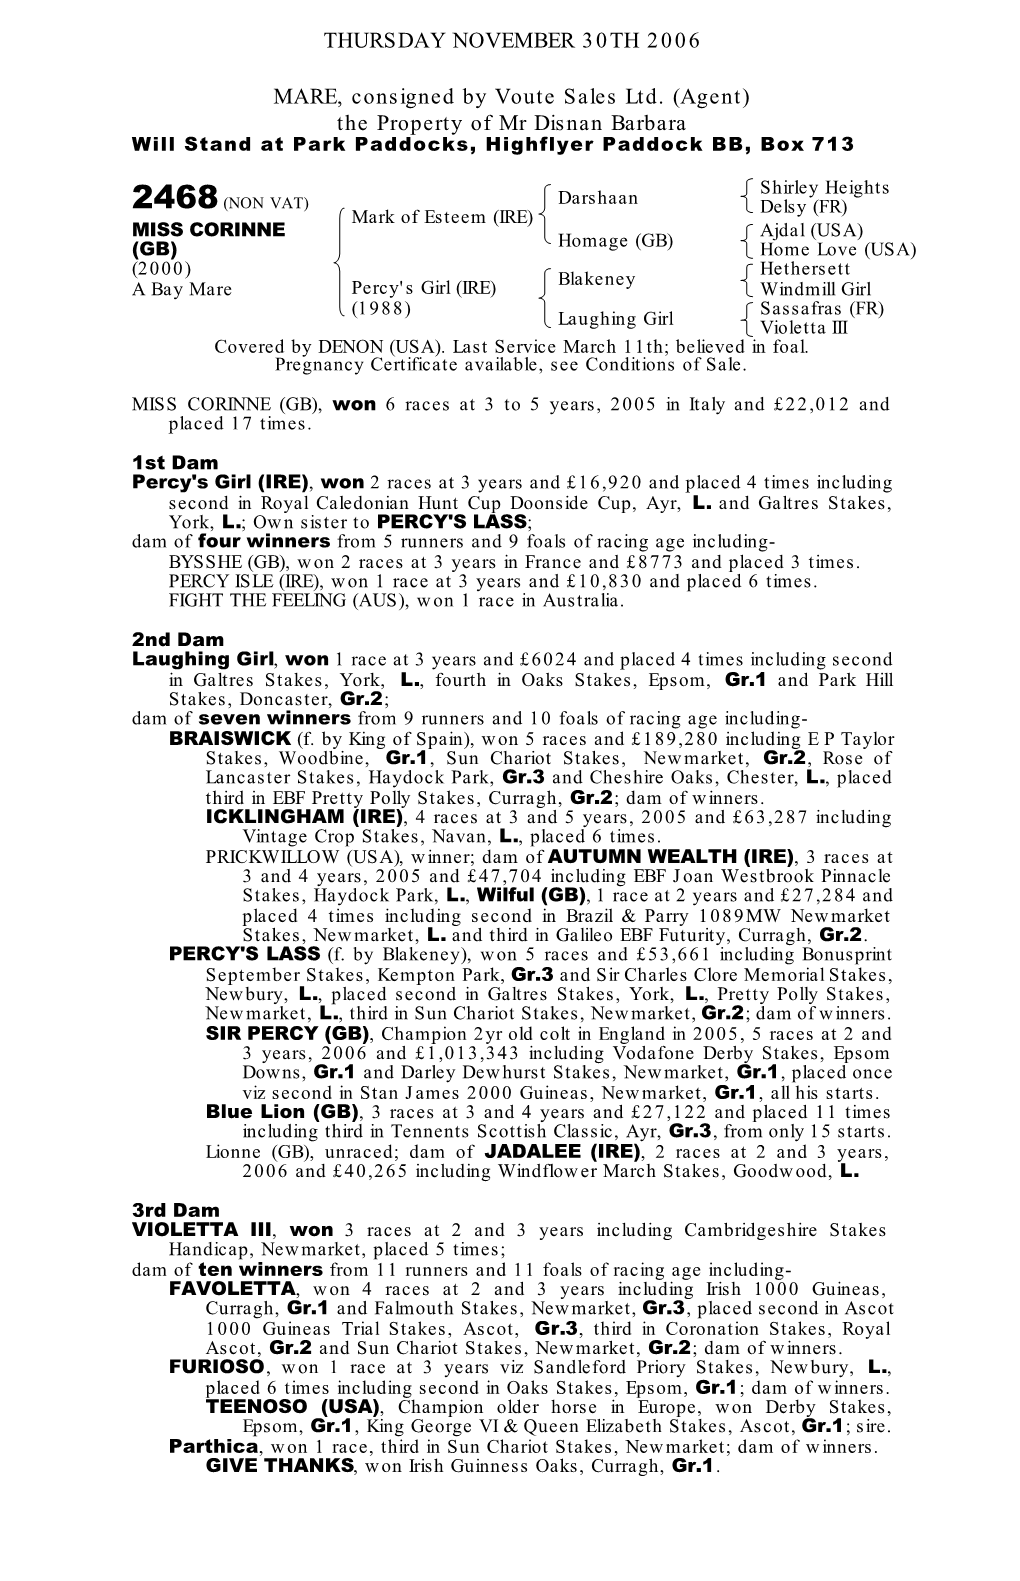 THURSDAY NOVEMBER 30TH 2006 MARE, Consigned by Voute Sales Ltd